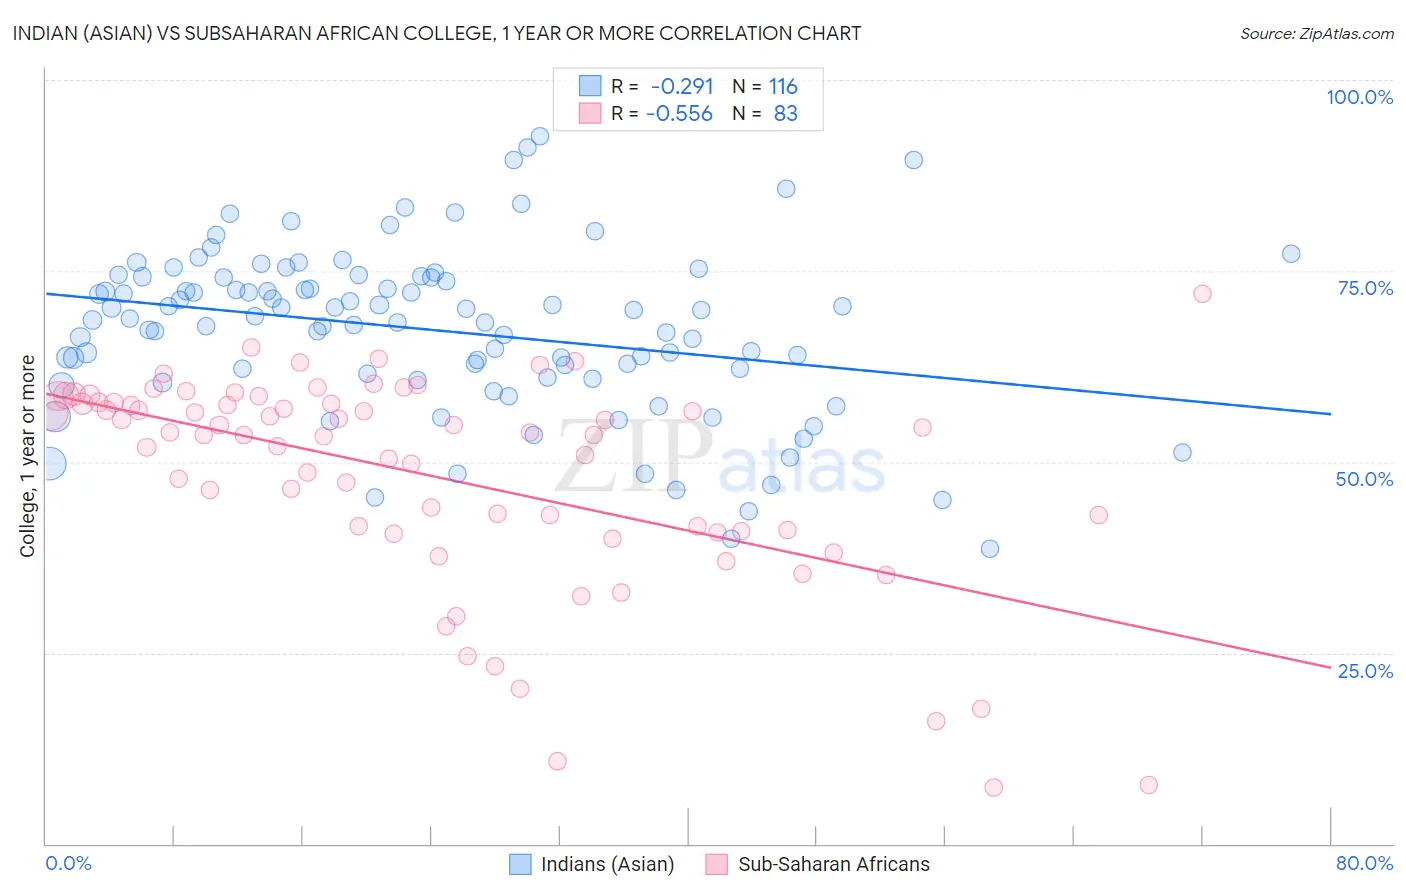 Indian (Asian) vs Subsaharan African College, 1 year or more